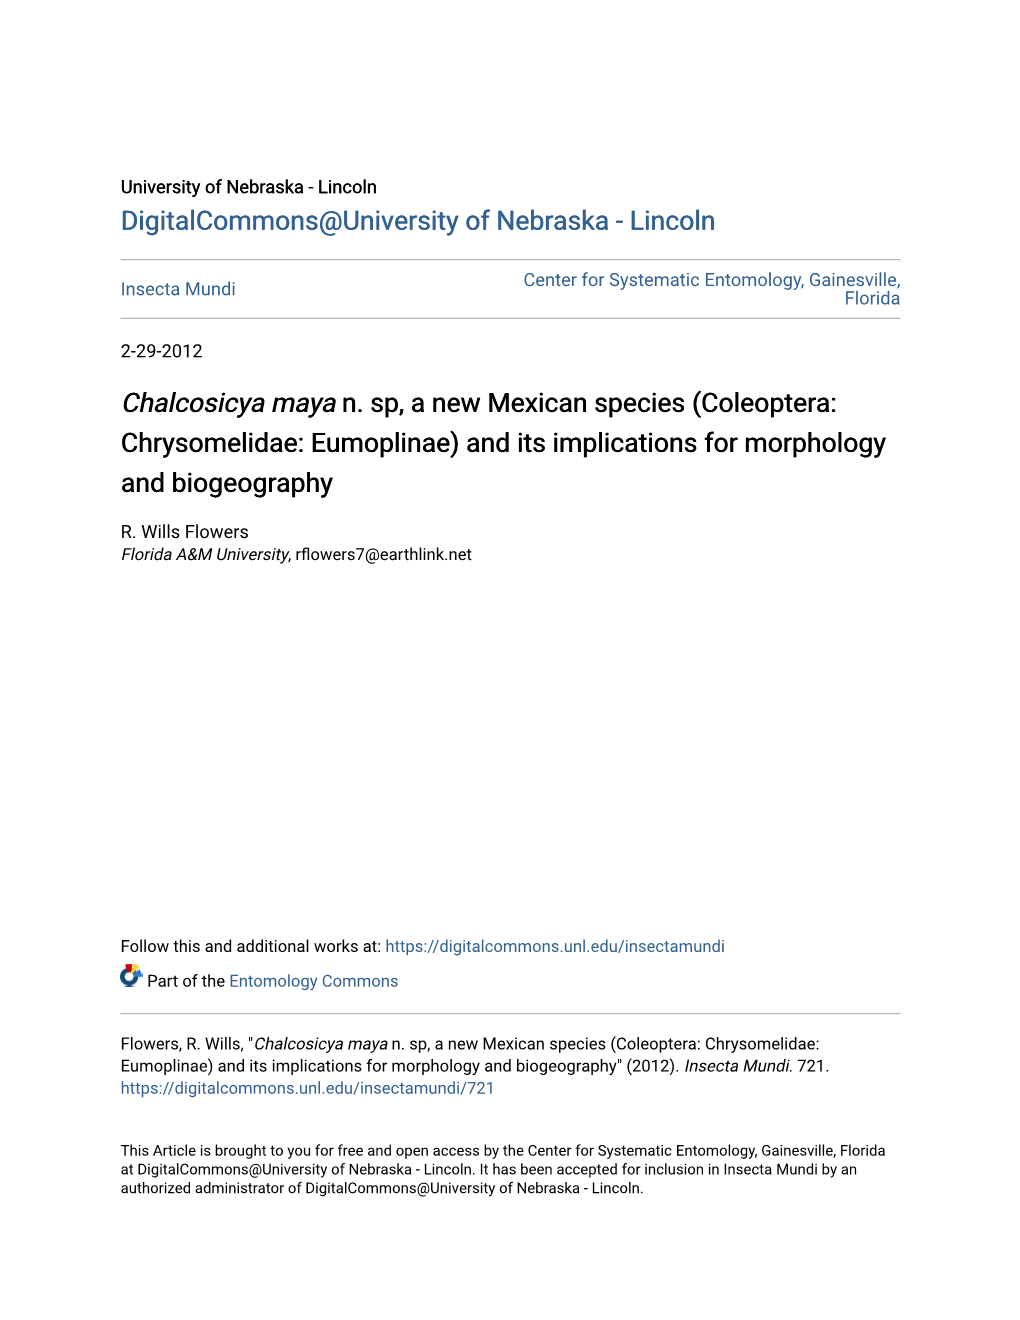 Coleoptera: Chrysomelidae: Eumoplinae) and Its Implications for Morphology and Biogeography